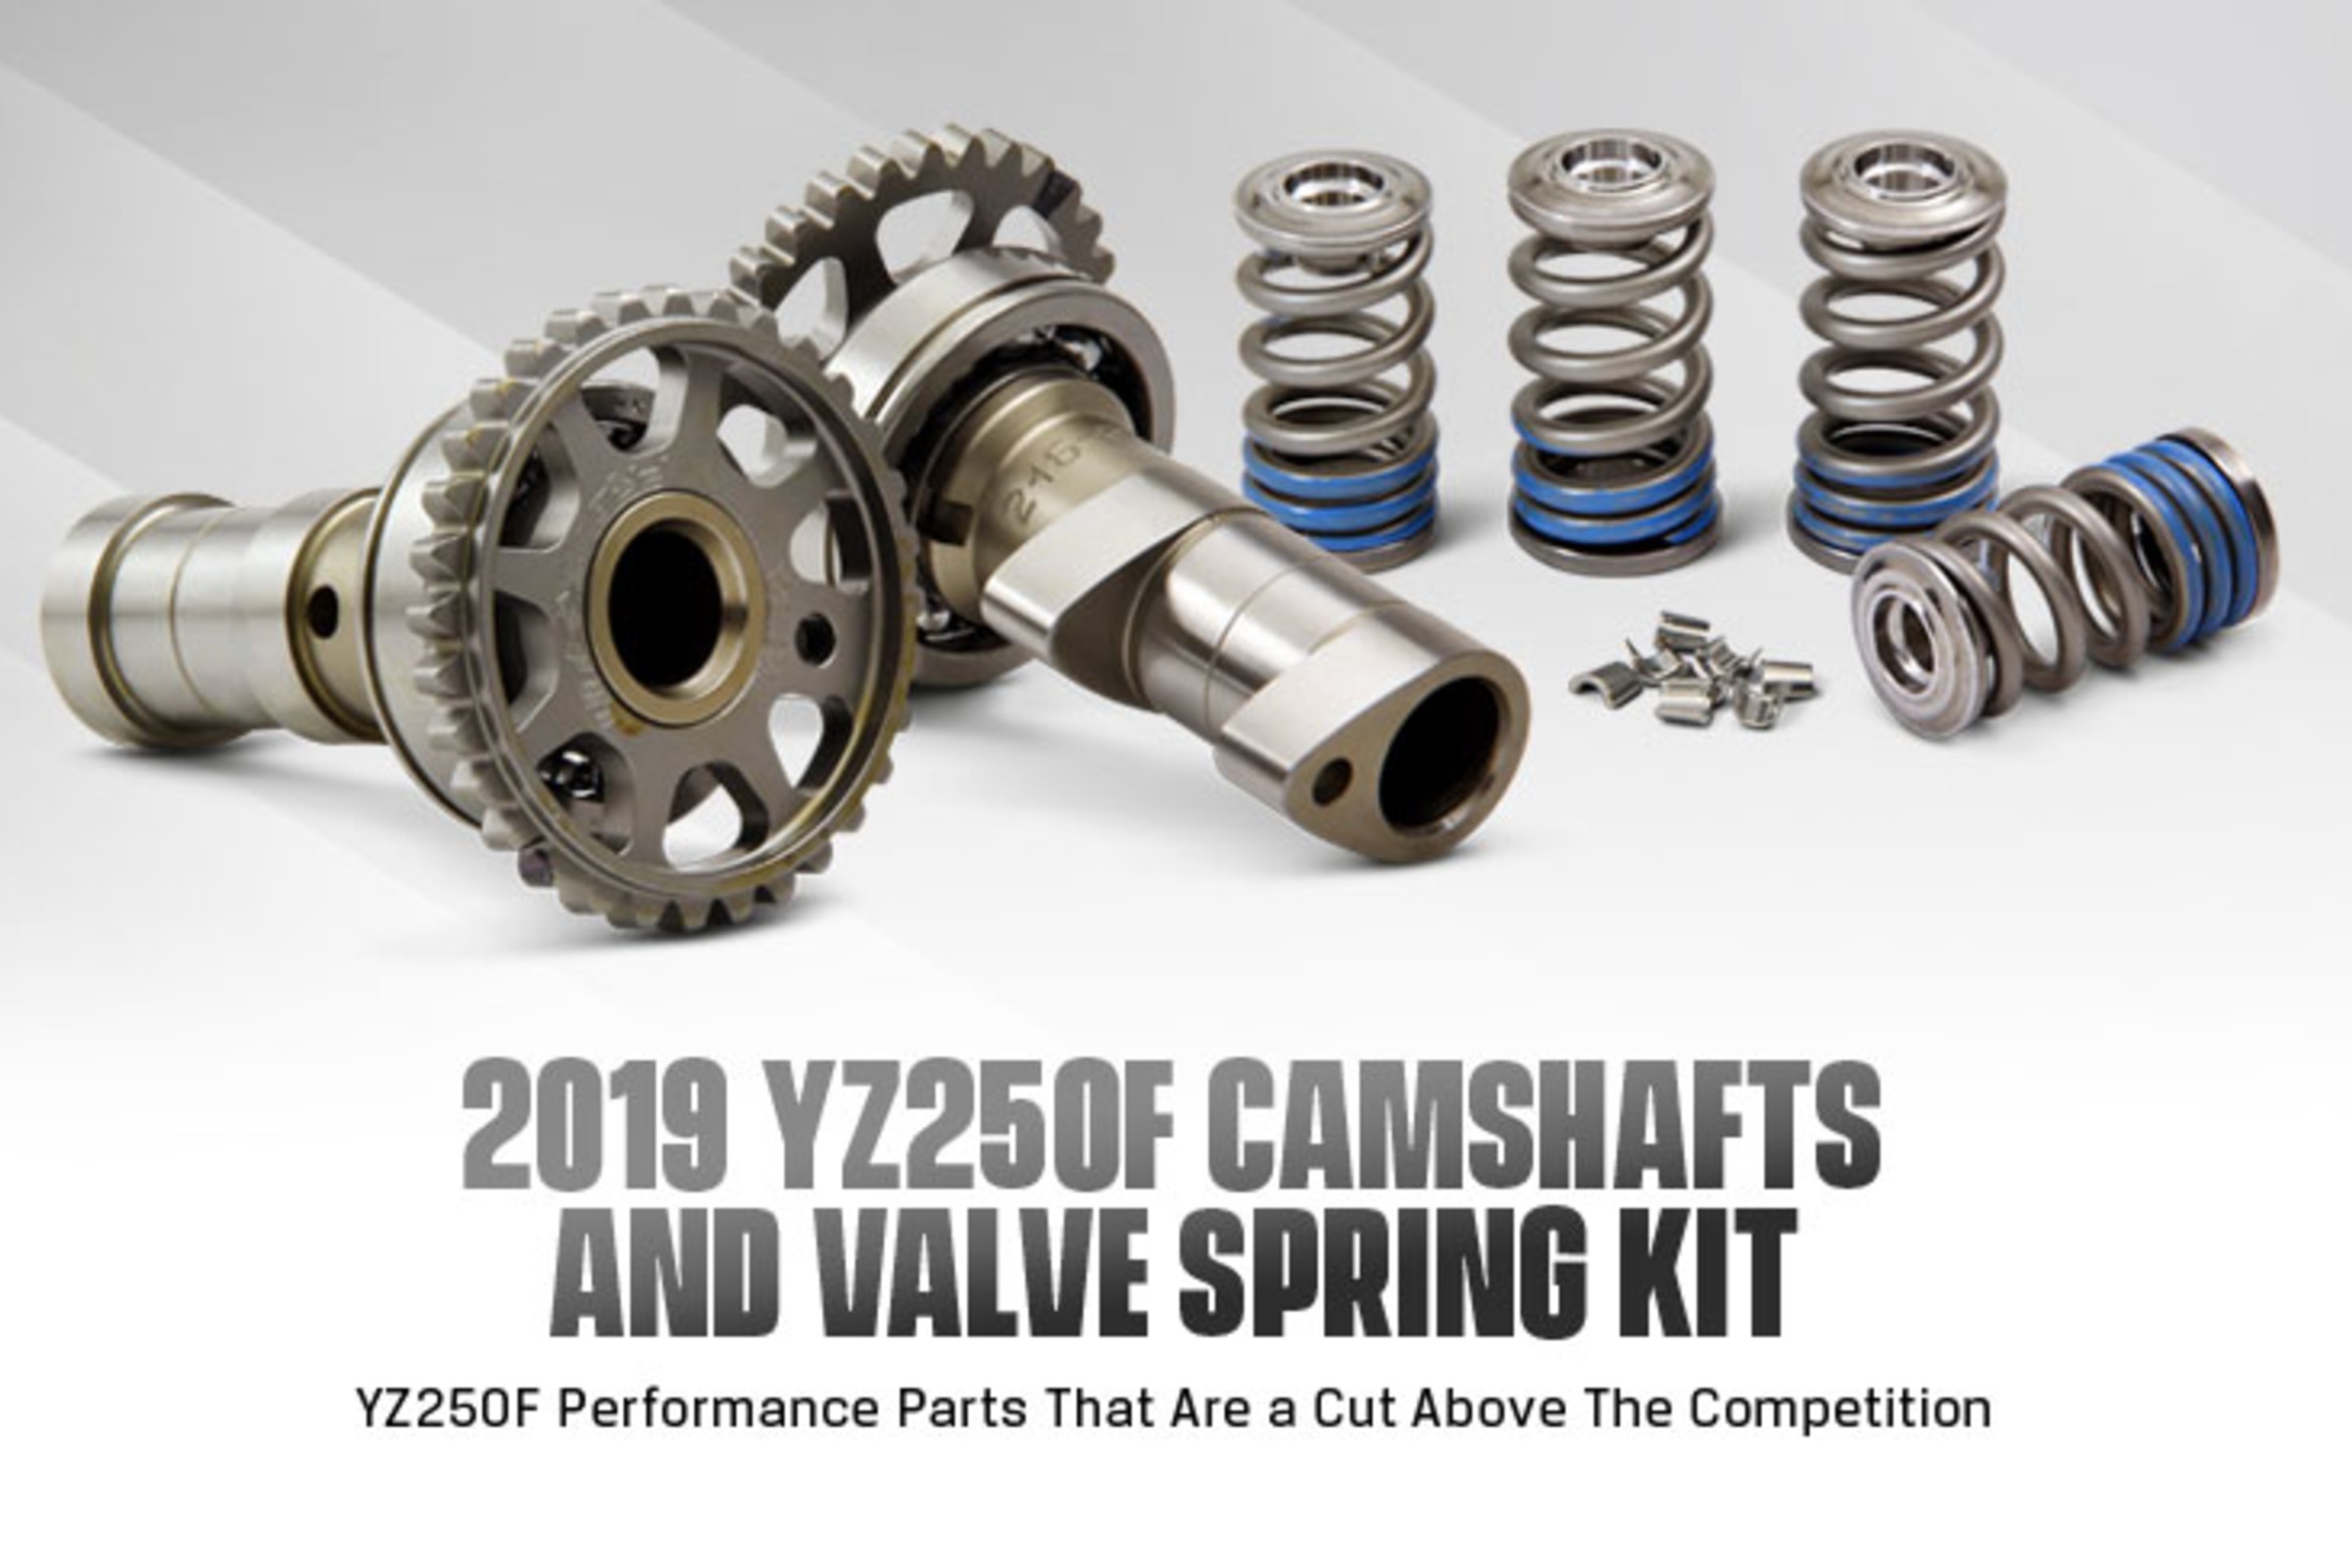 Pro Circuit Introduces 2019 YZ250F Camshafts and Valve Spring Kit